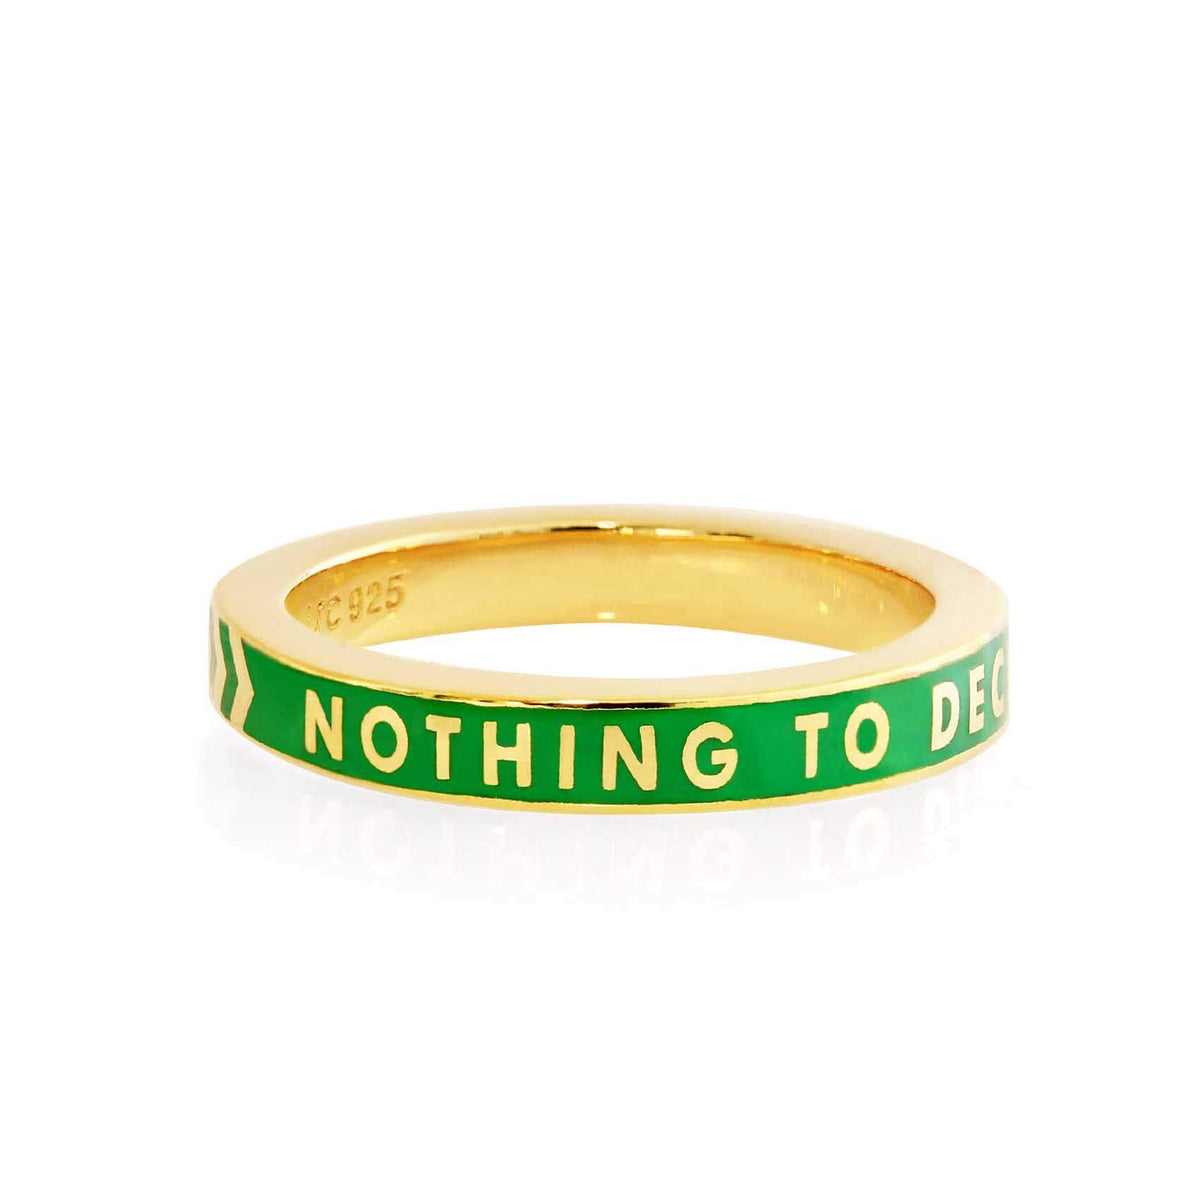 Nothing to Declare Ring, Green Enamel, Gold – JET SET CANDY